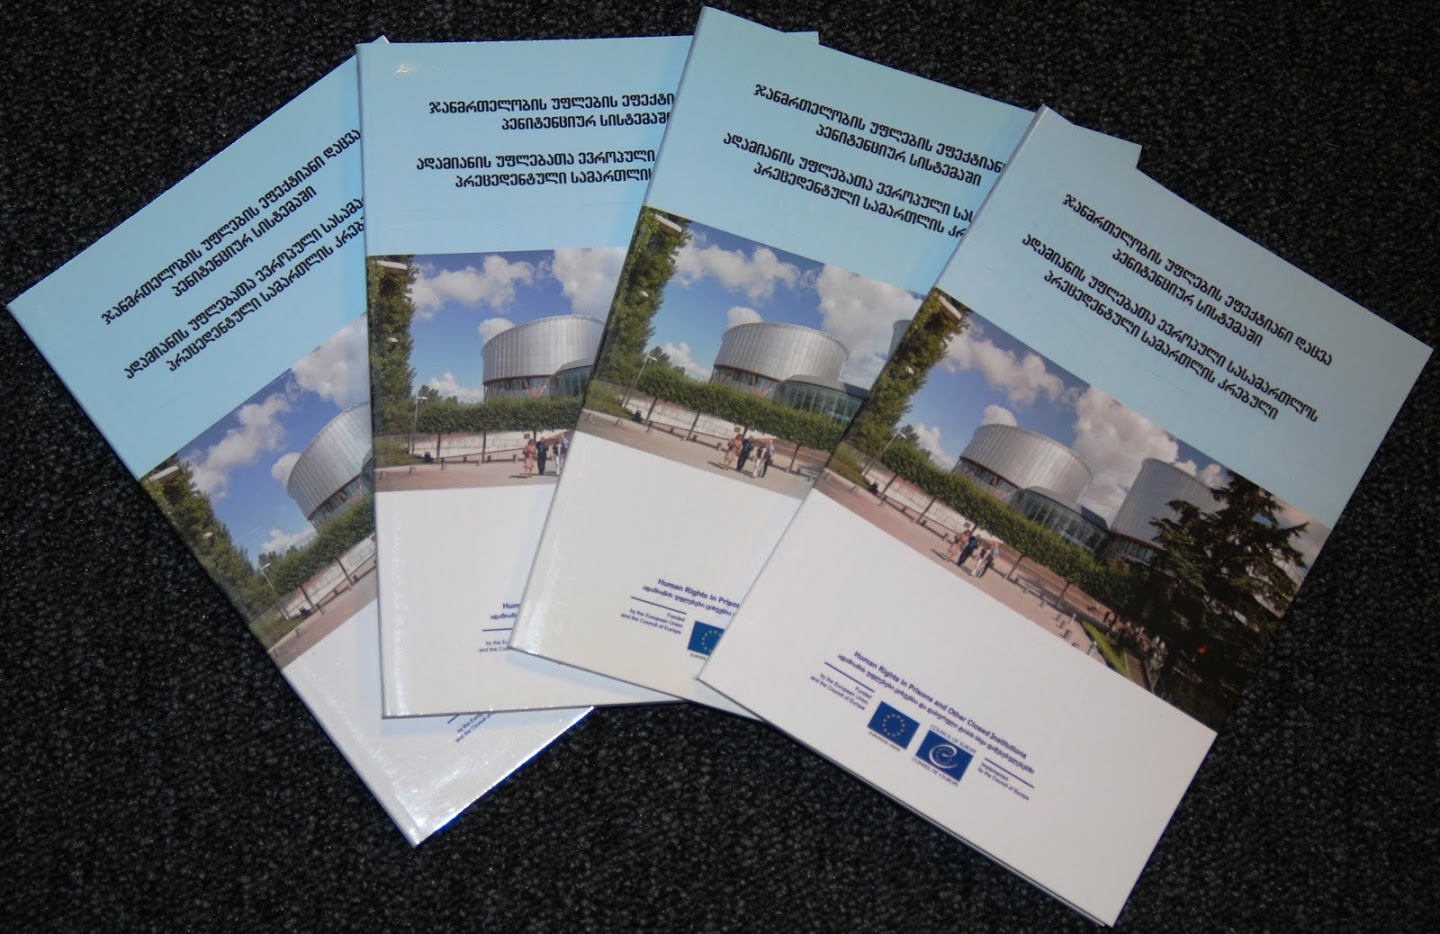 Compilation of summaries of the case law of the ECtHR on prison healthcare related issues was developed in Georgian and printed in 500 copies